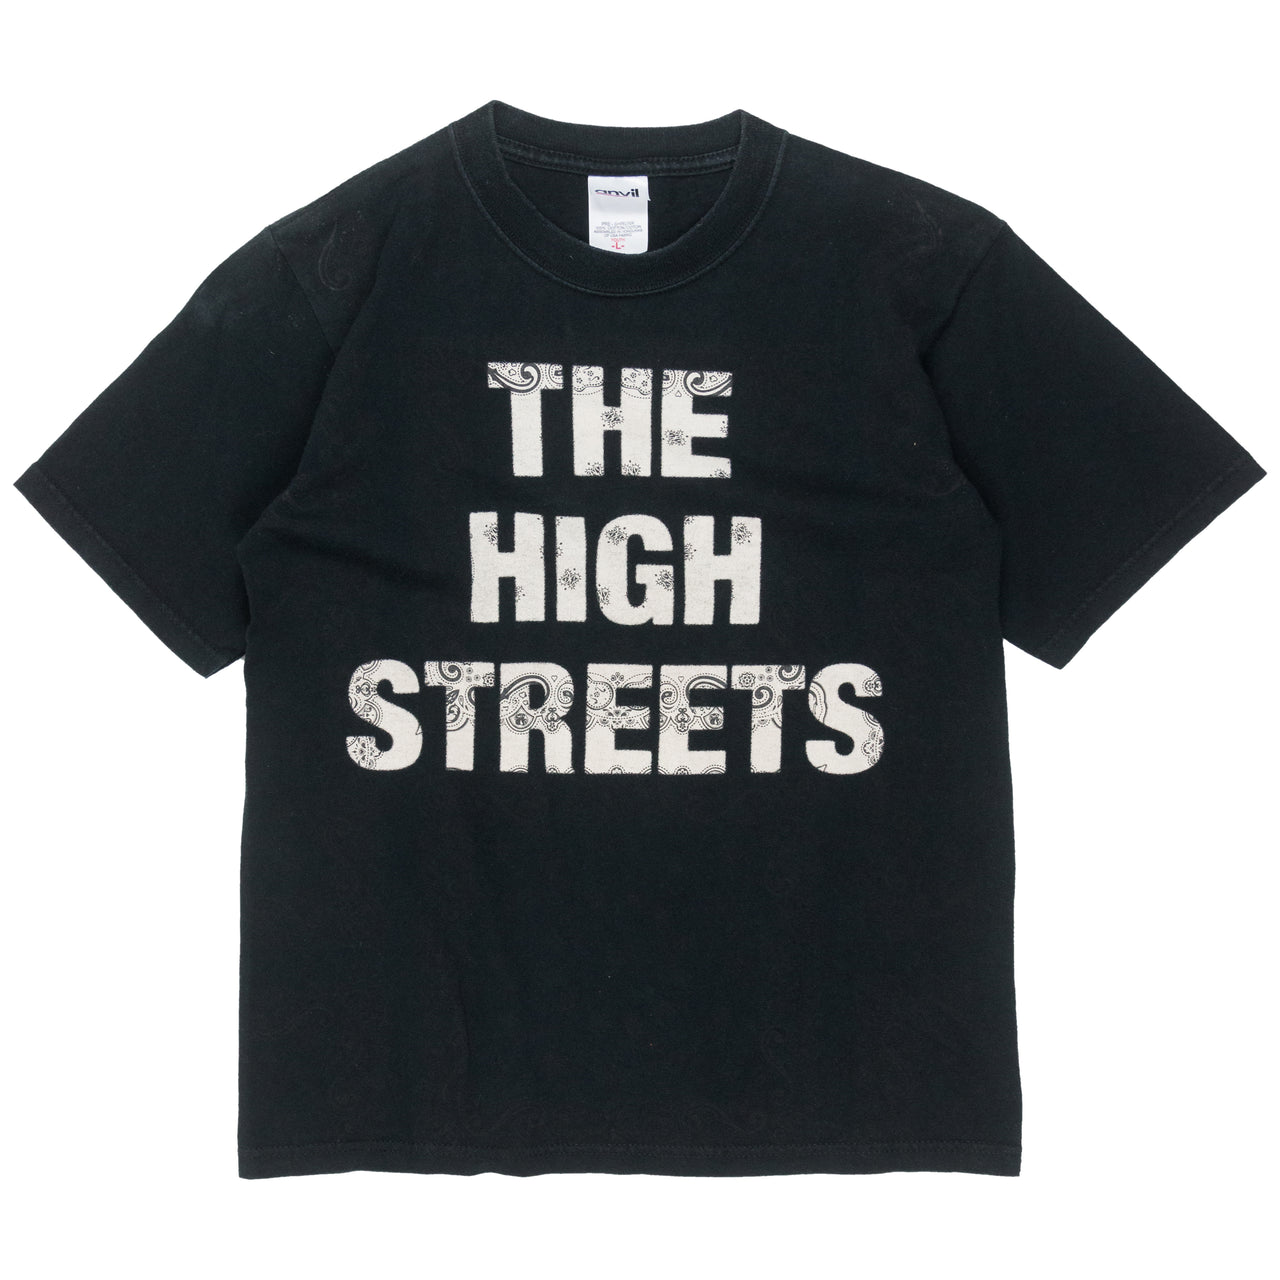 Number (N)ine "The High Streets" Bandana Tee - AW05 "The High Streets"